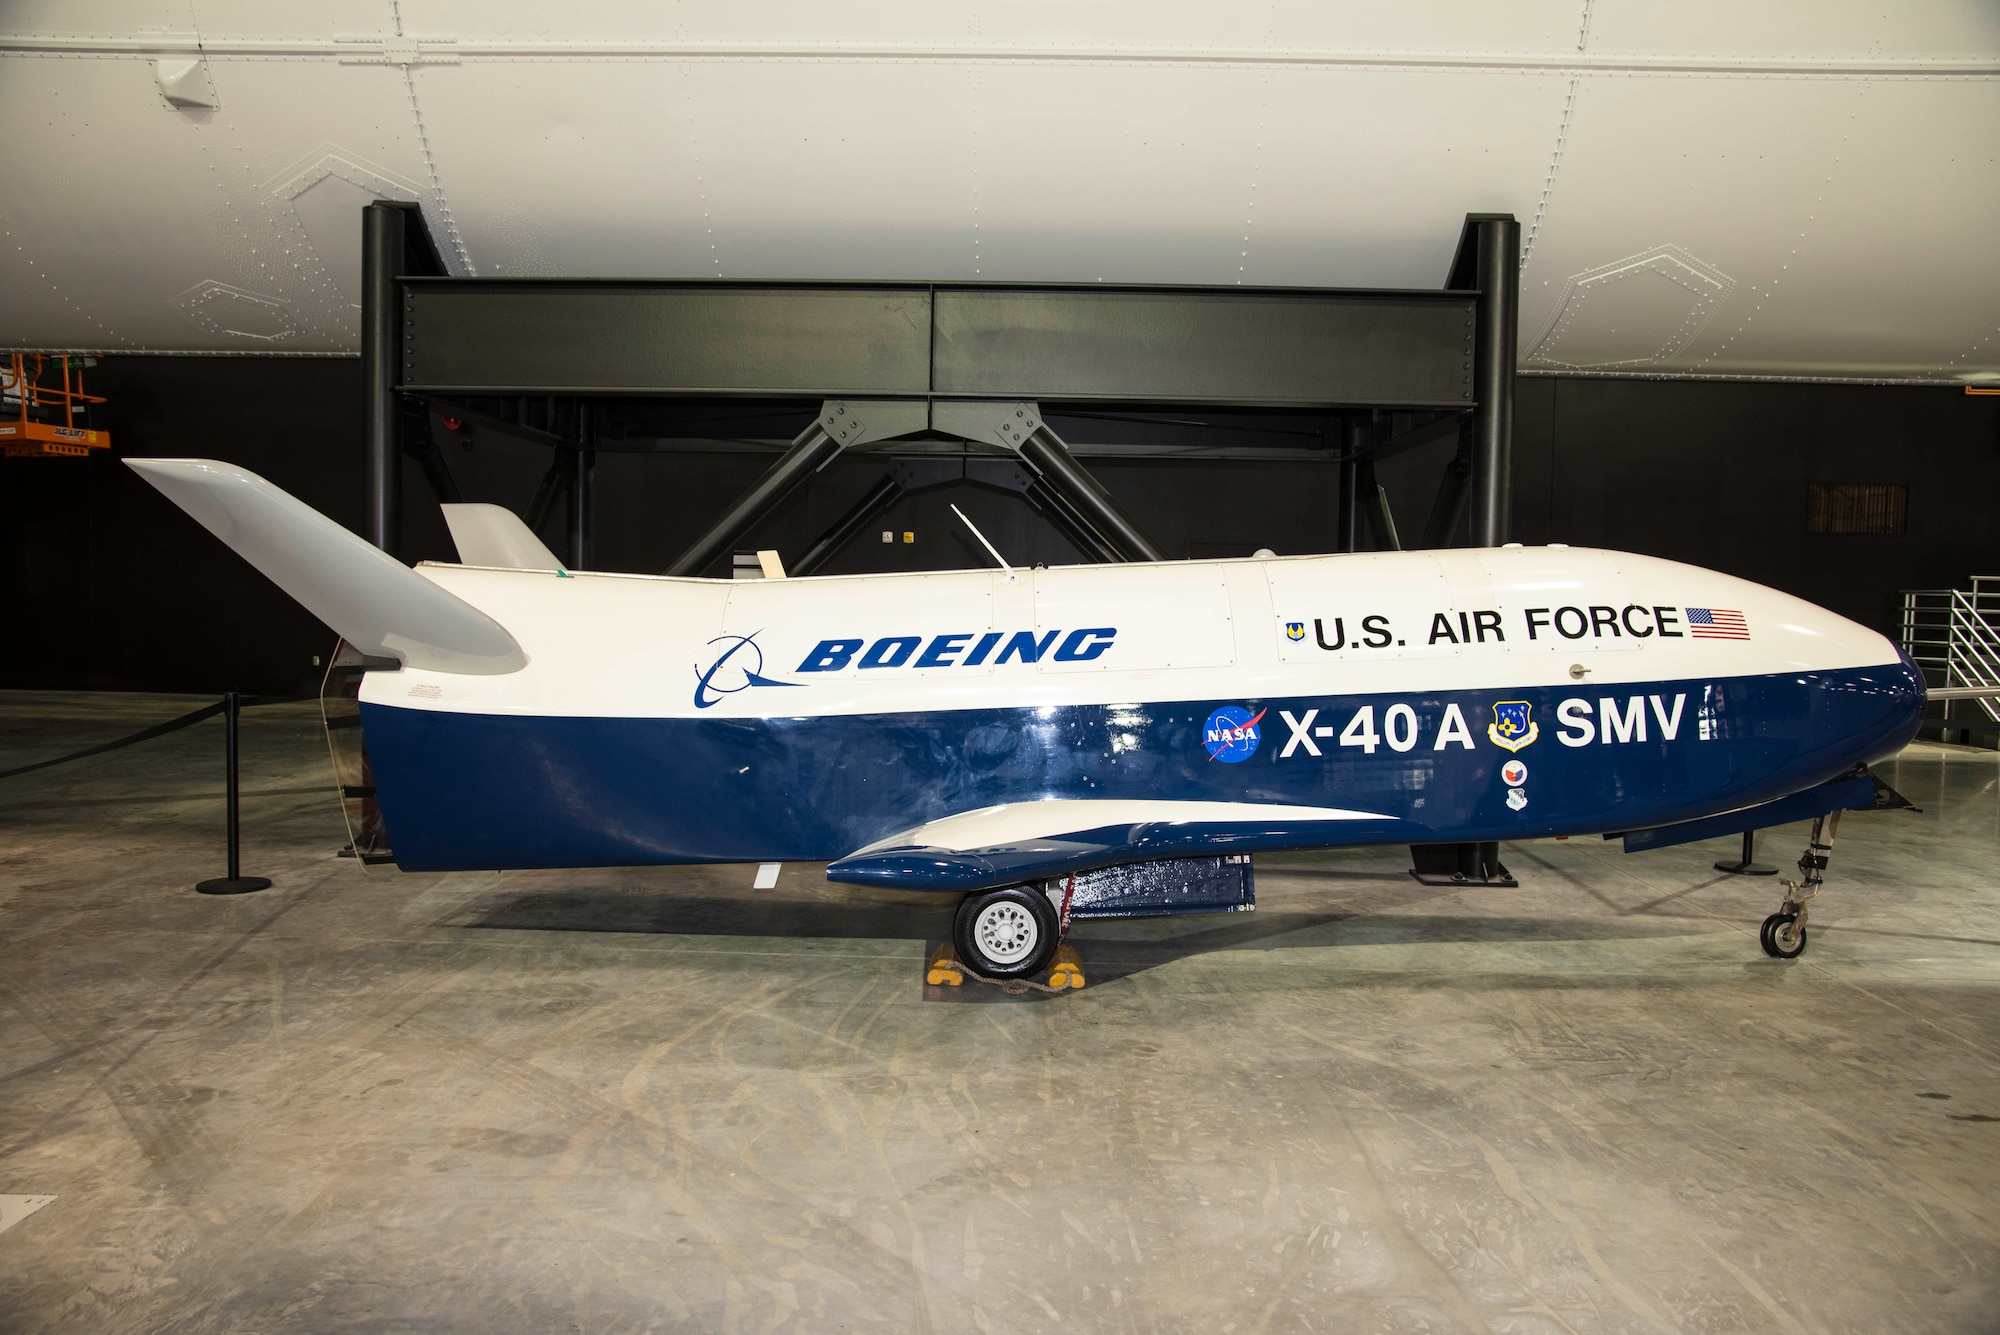 DAYTON, Ohio -- Boeing X-40A in the Space Gallery at the National Museum of the United States Air Force. (U.S. Air Force photo by Ken LaRock) 